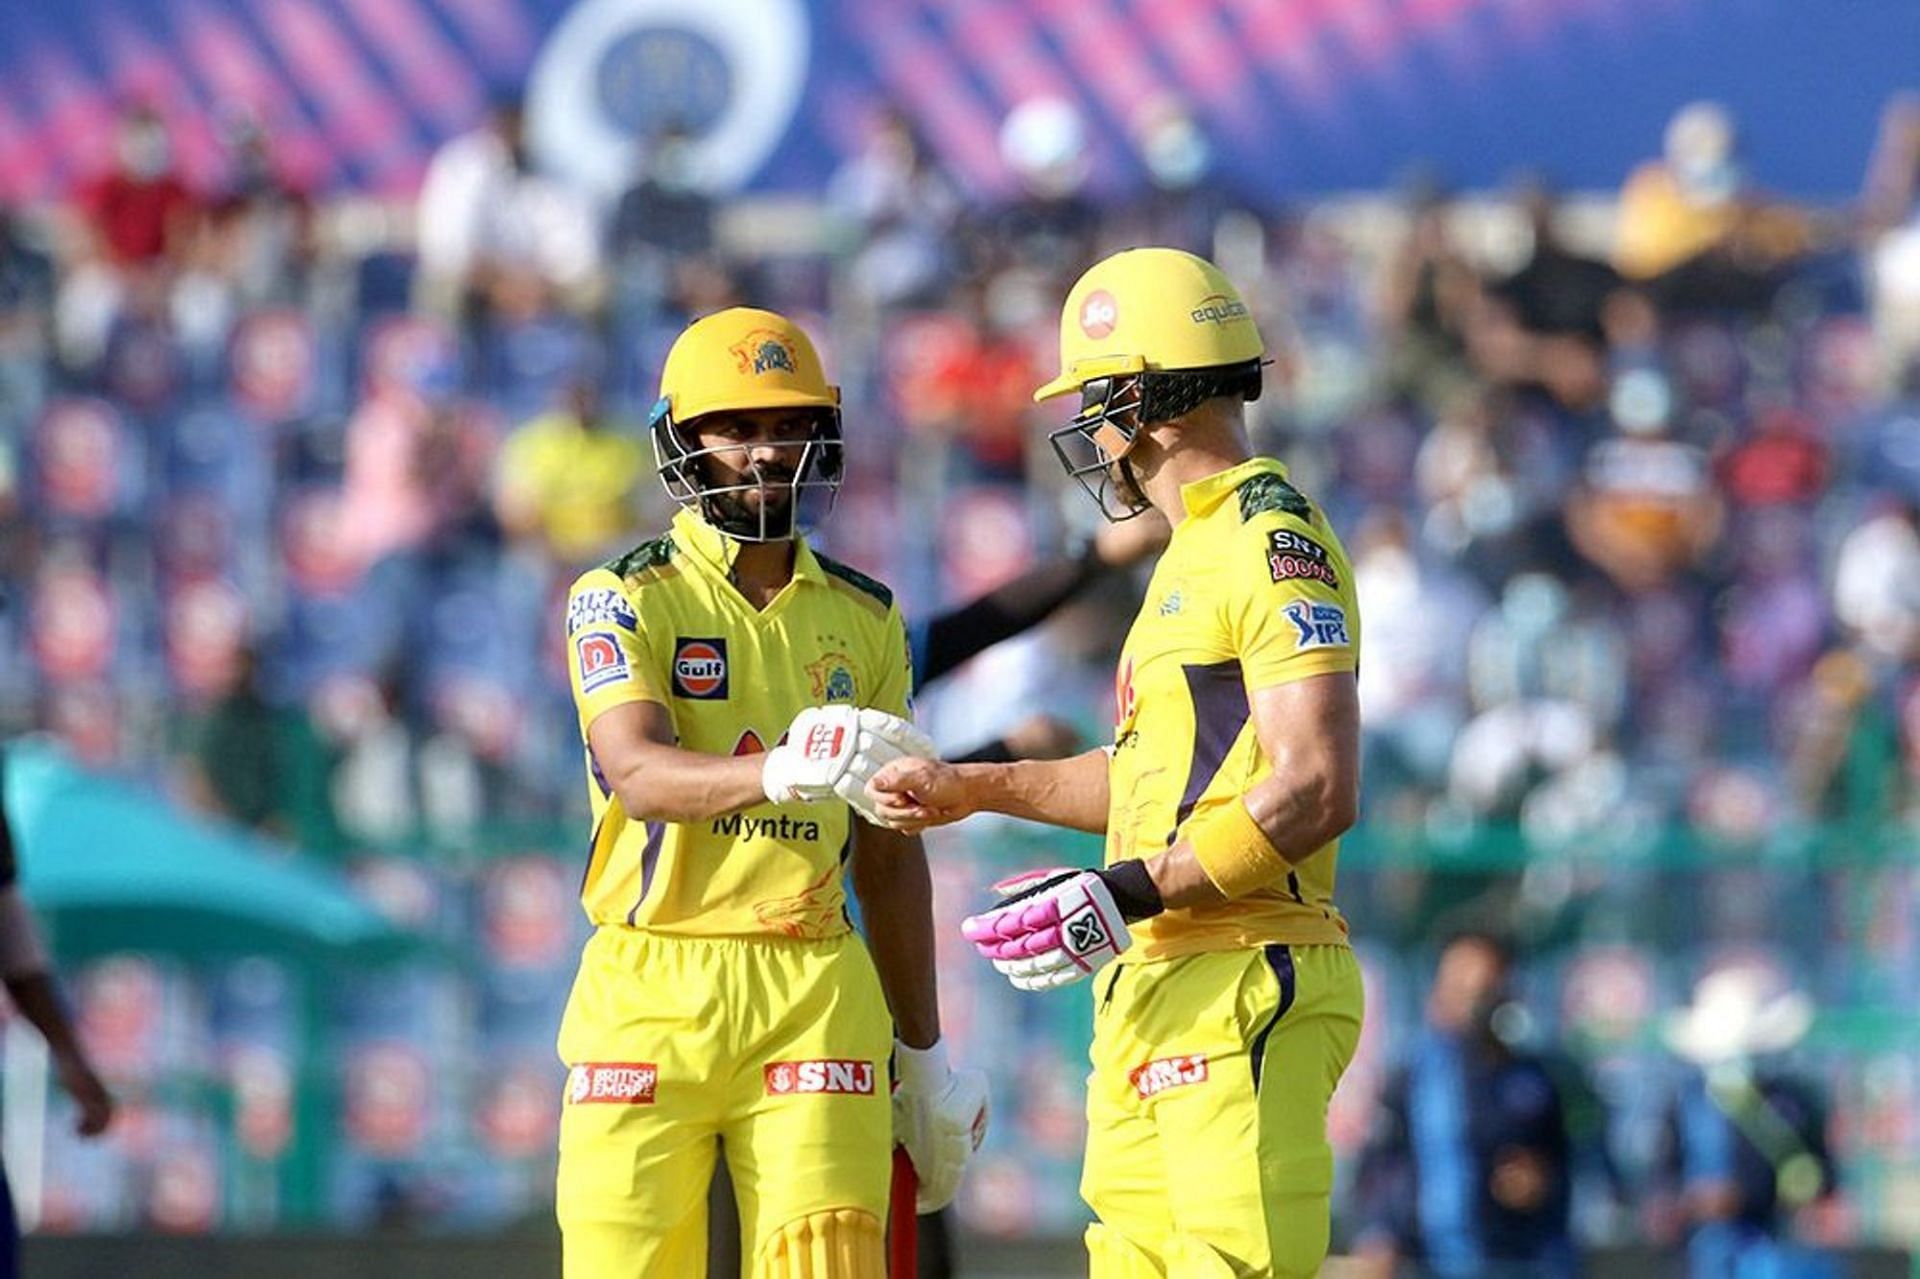 Ruturaj Gaikwad and Faf du Plessis have been prolific at the top of the order for CSK [P/C: iplt20.com]